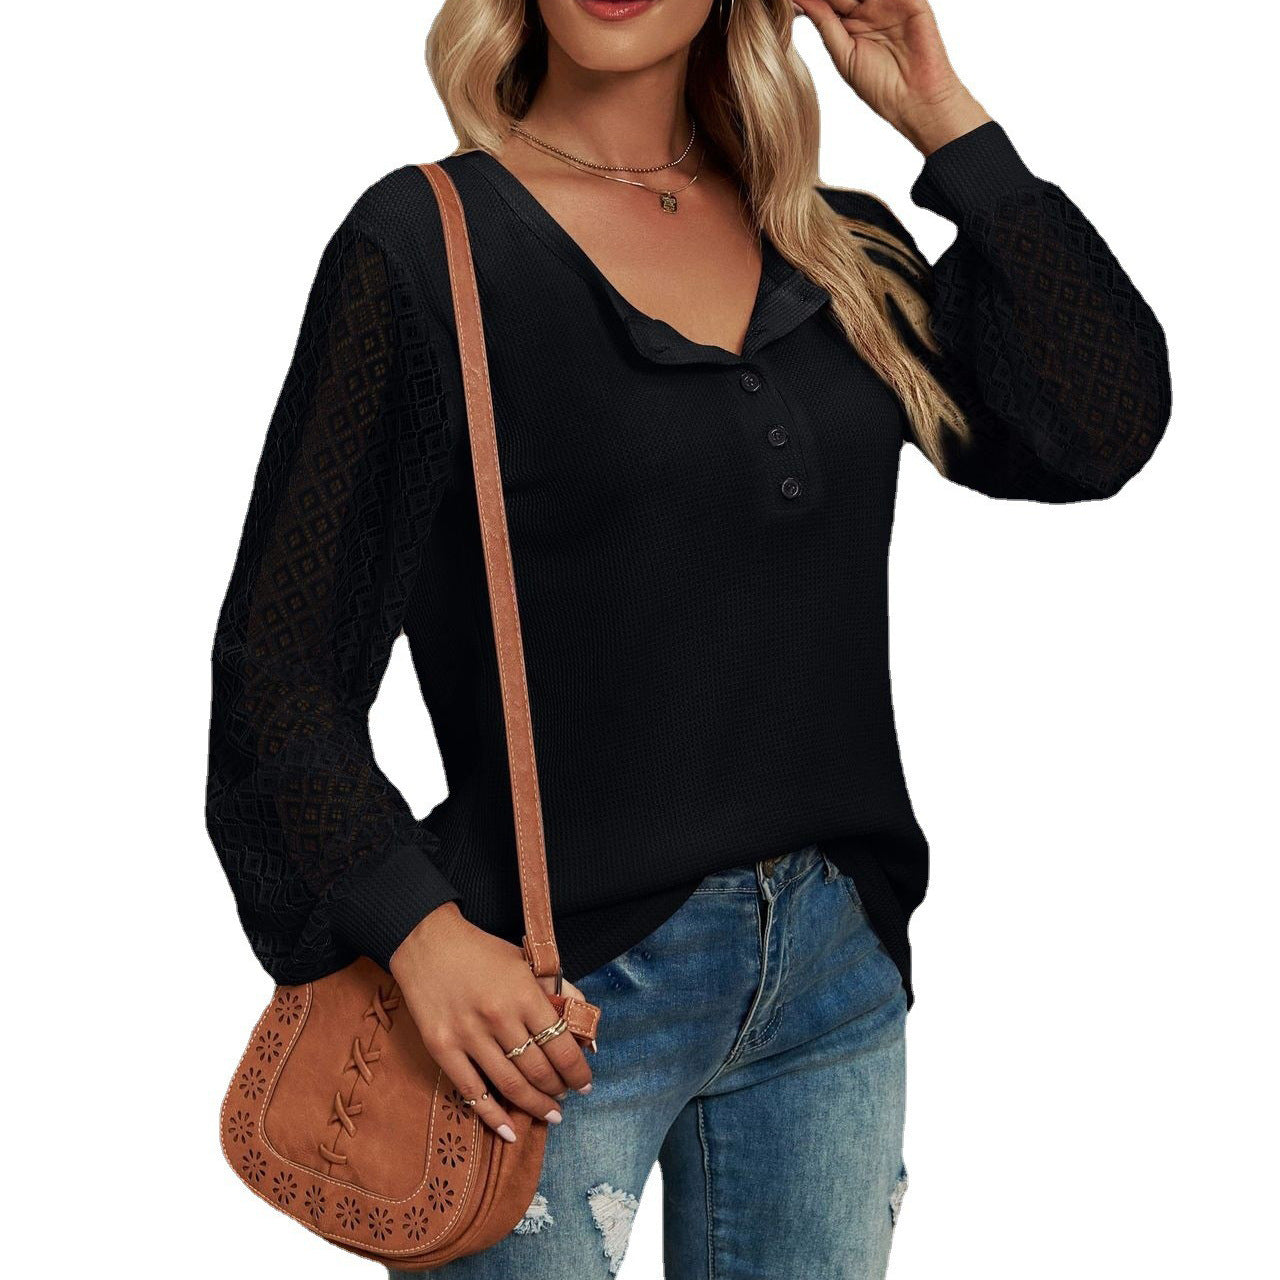 Women's Lace Stitching Long Sleeve Button T-shirt Blouses